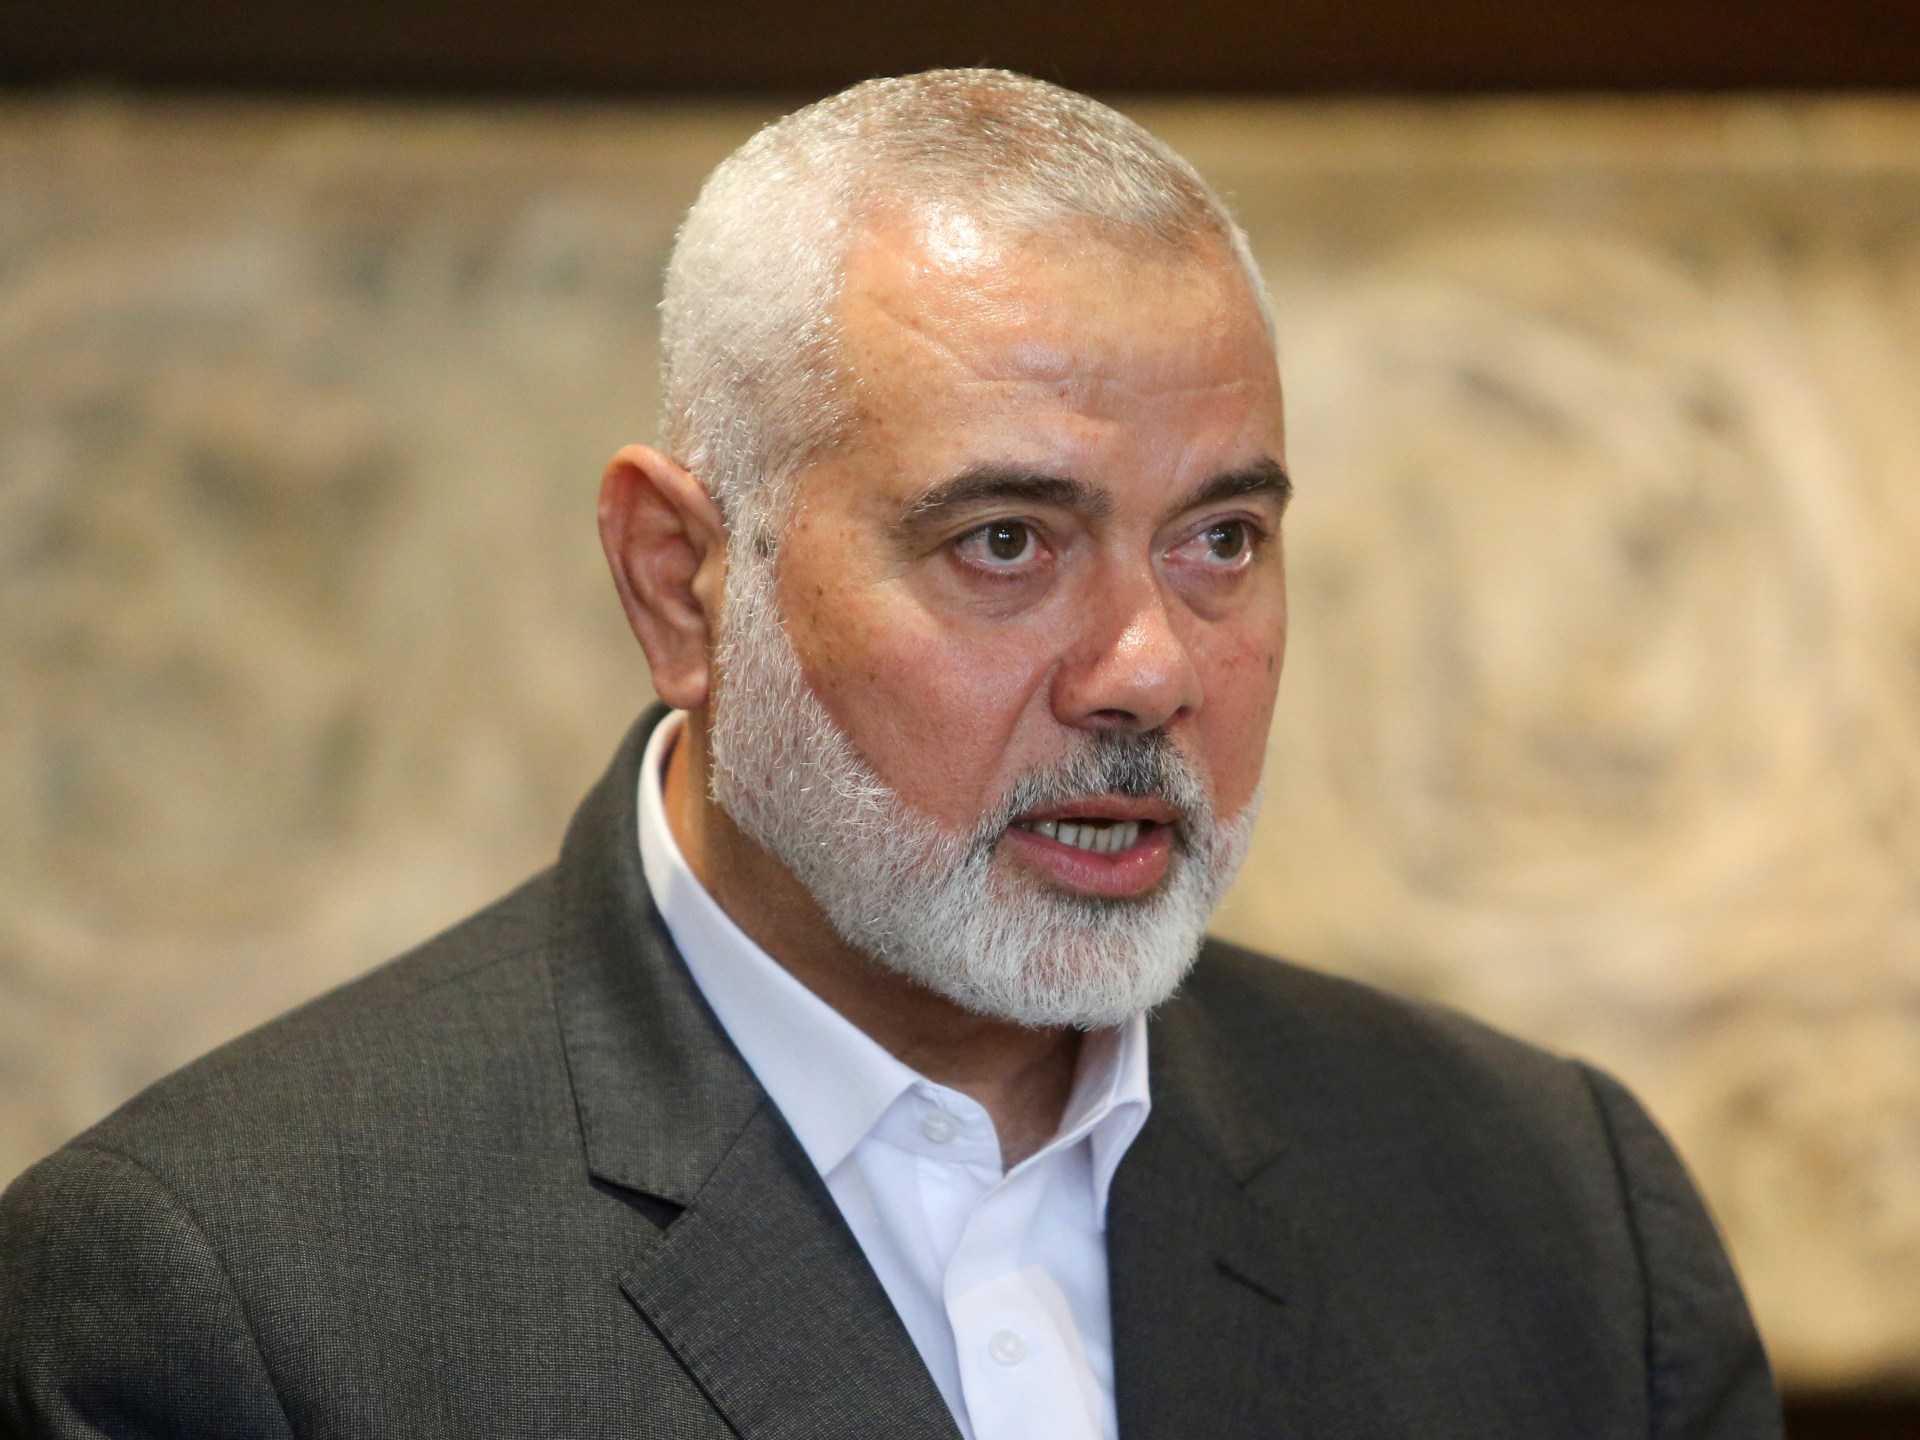 Gaza ‘approaching a truce agreement’ with Israel, says Hamas leader Haniyeh